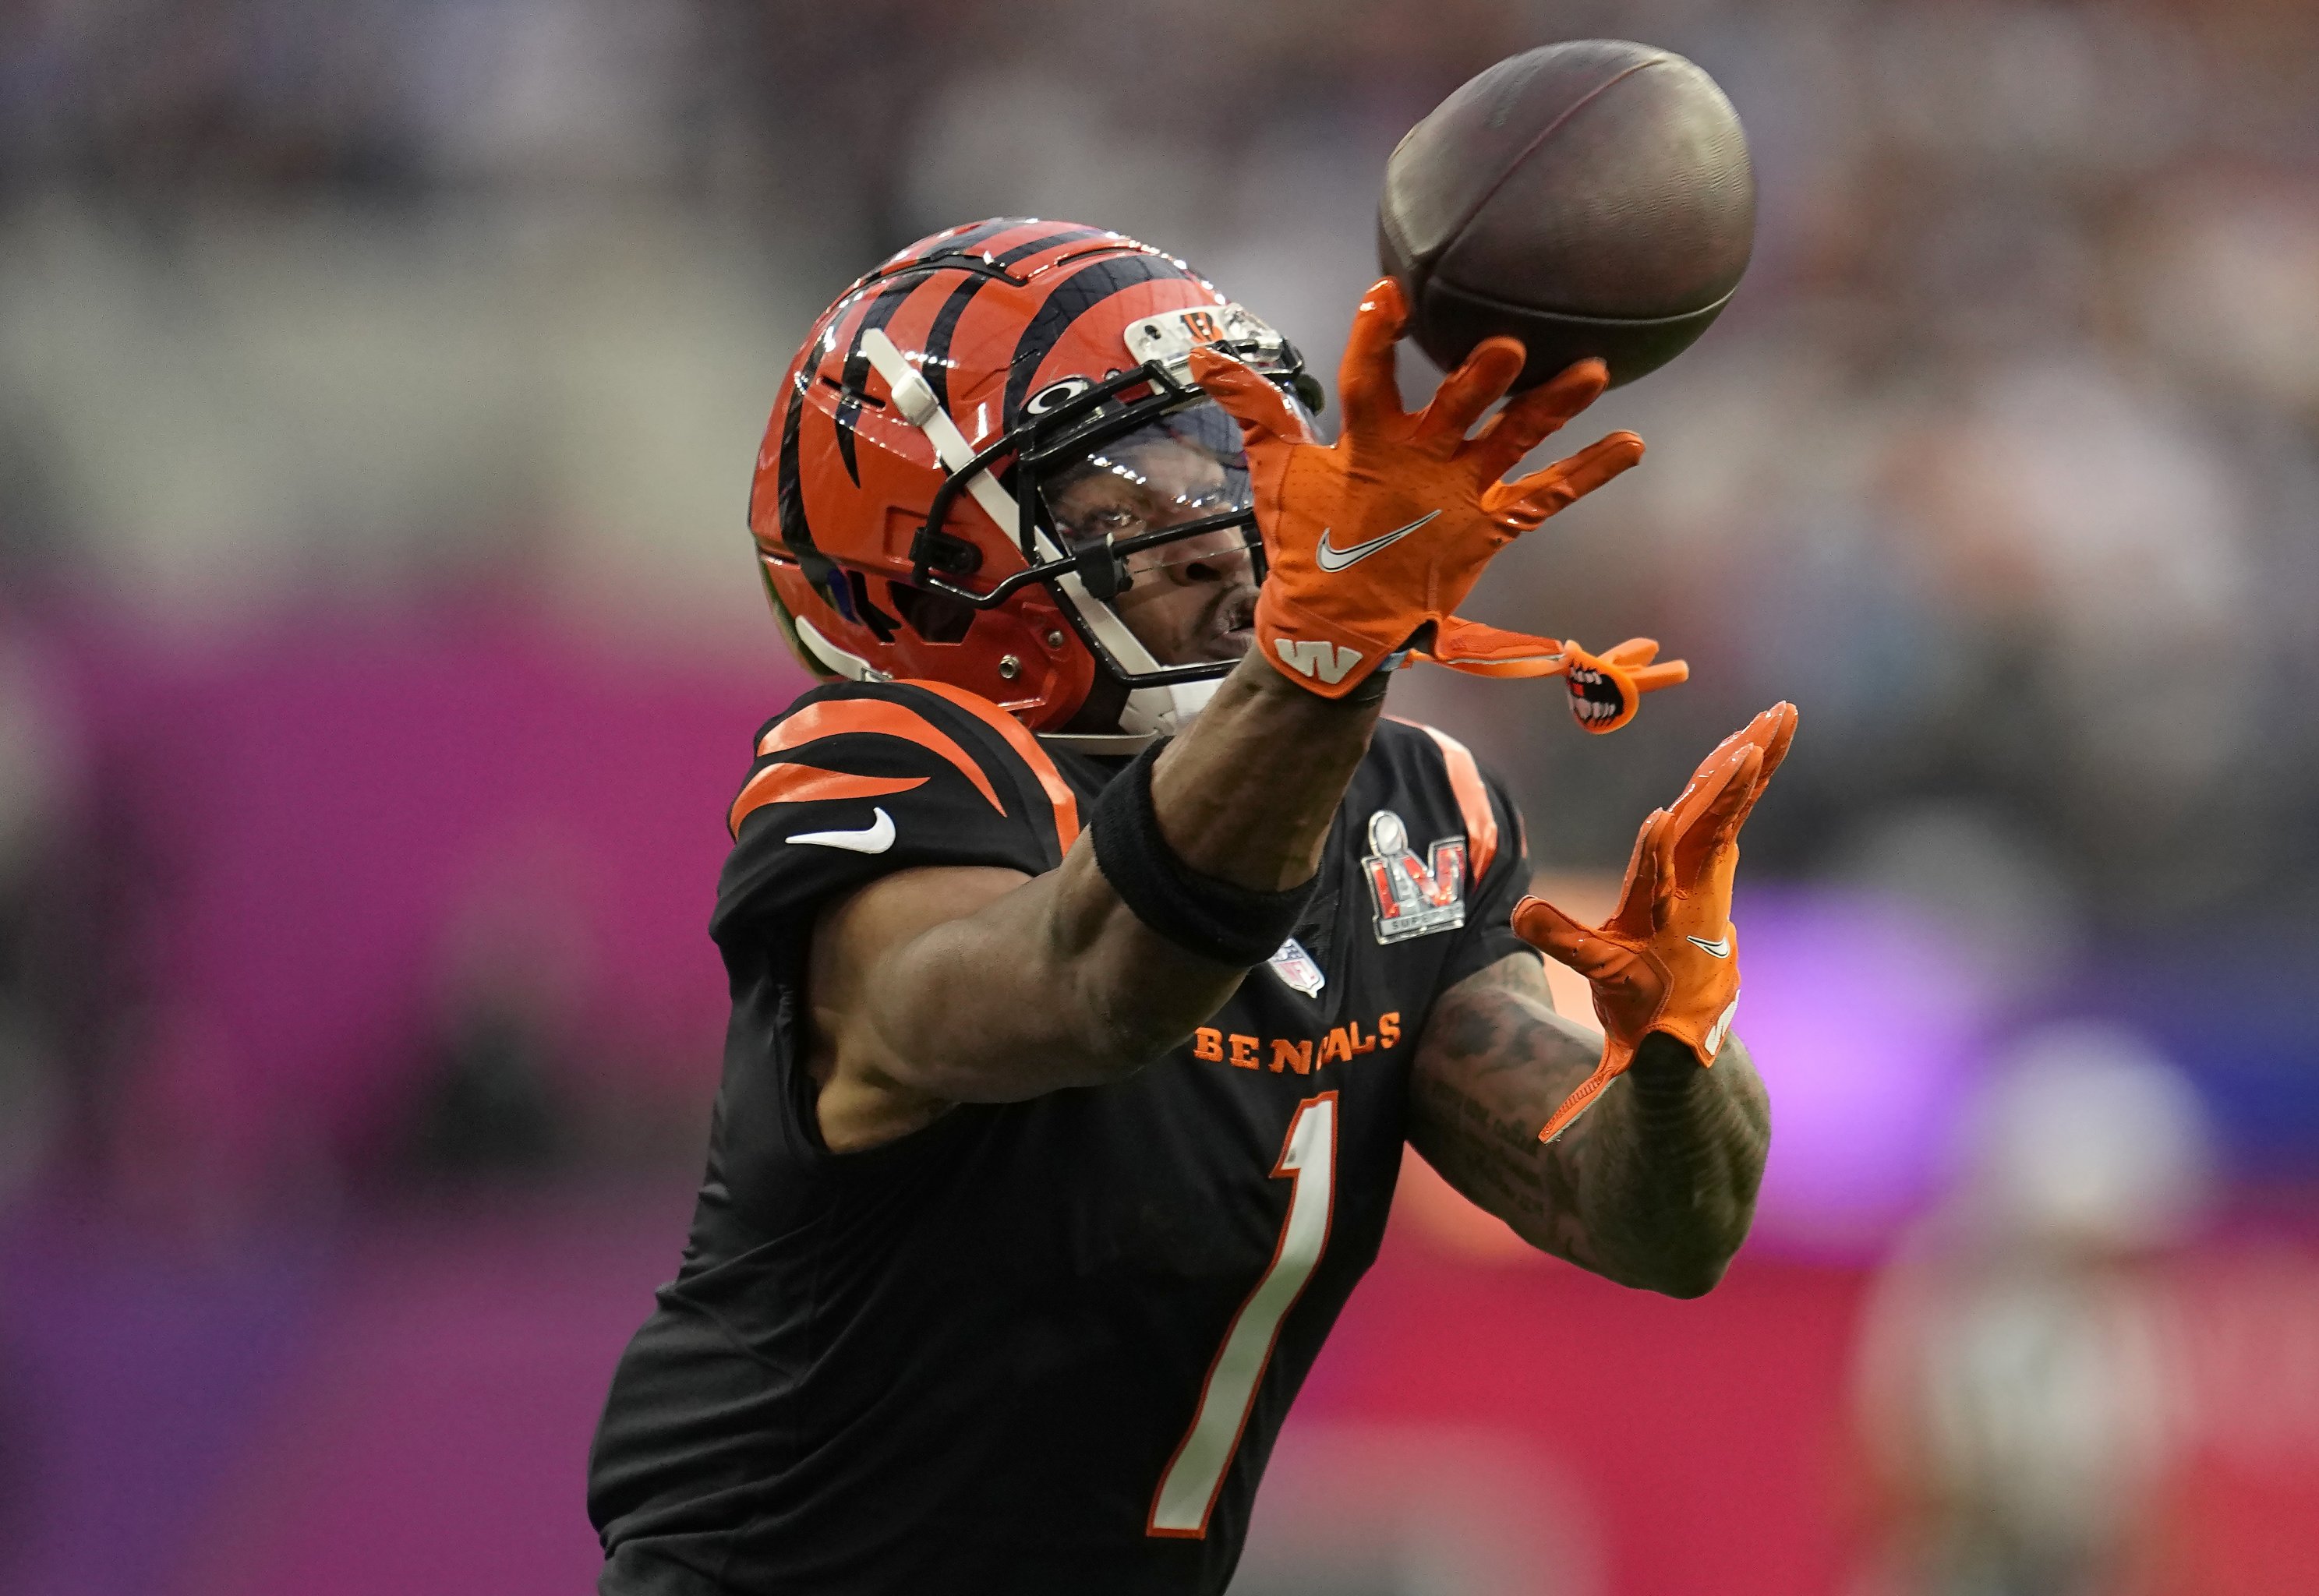 5 reasons the Bengals might not make it back to the Super Bowl